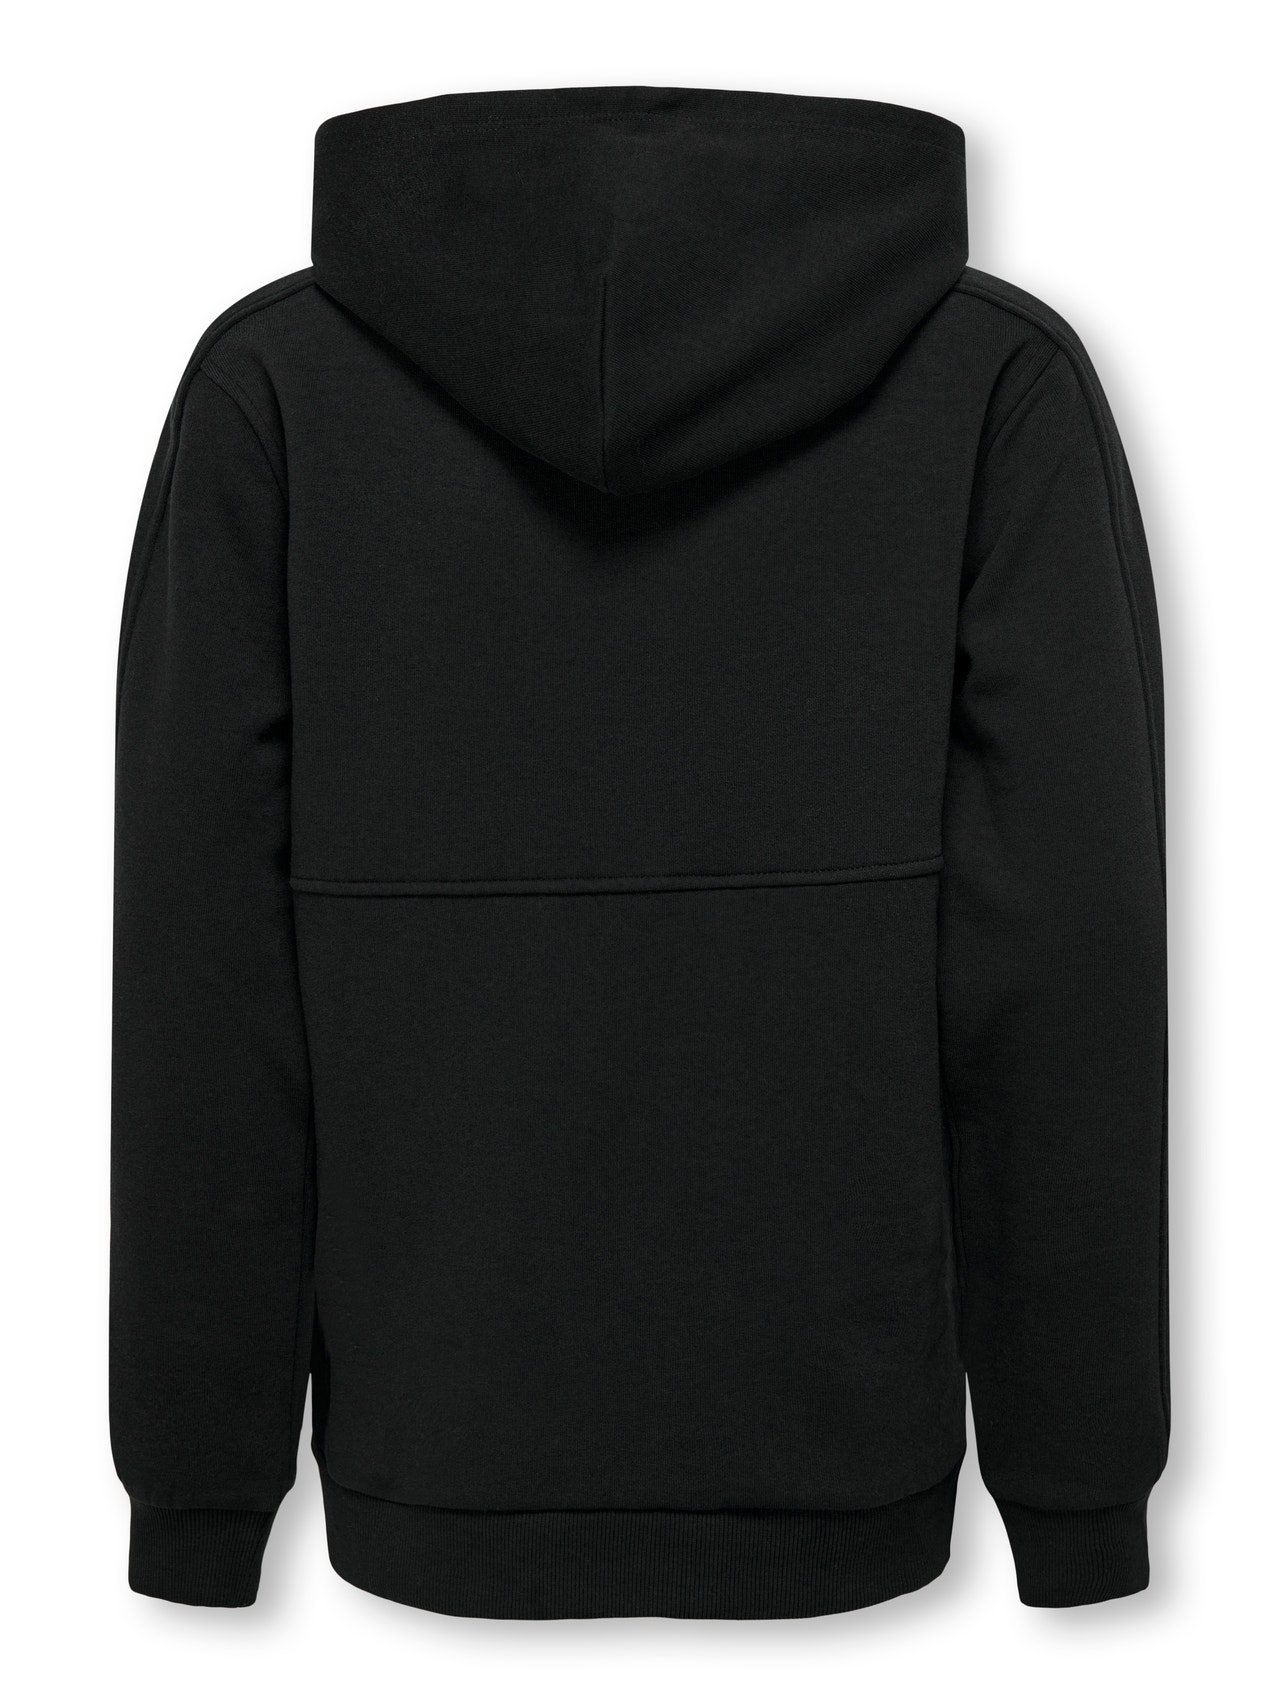 ONLY Solid color hoodie -Black - 15302859